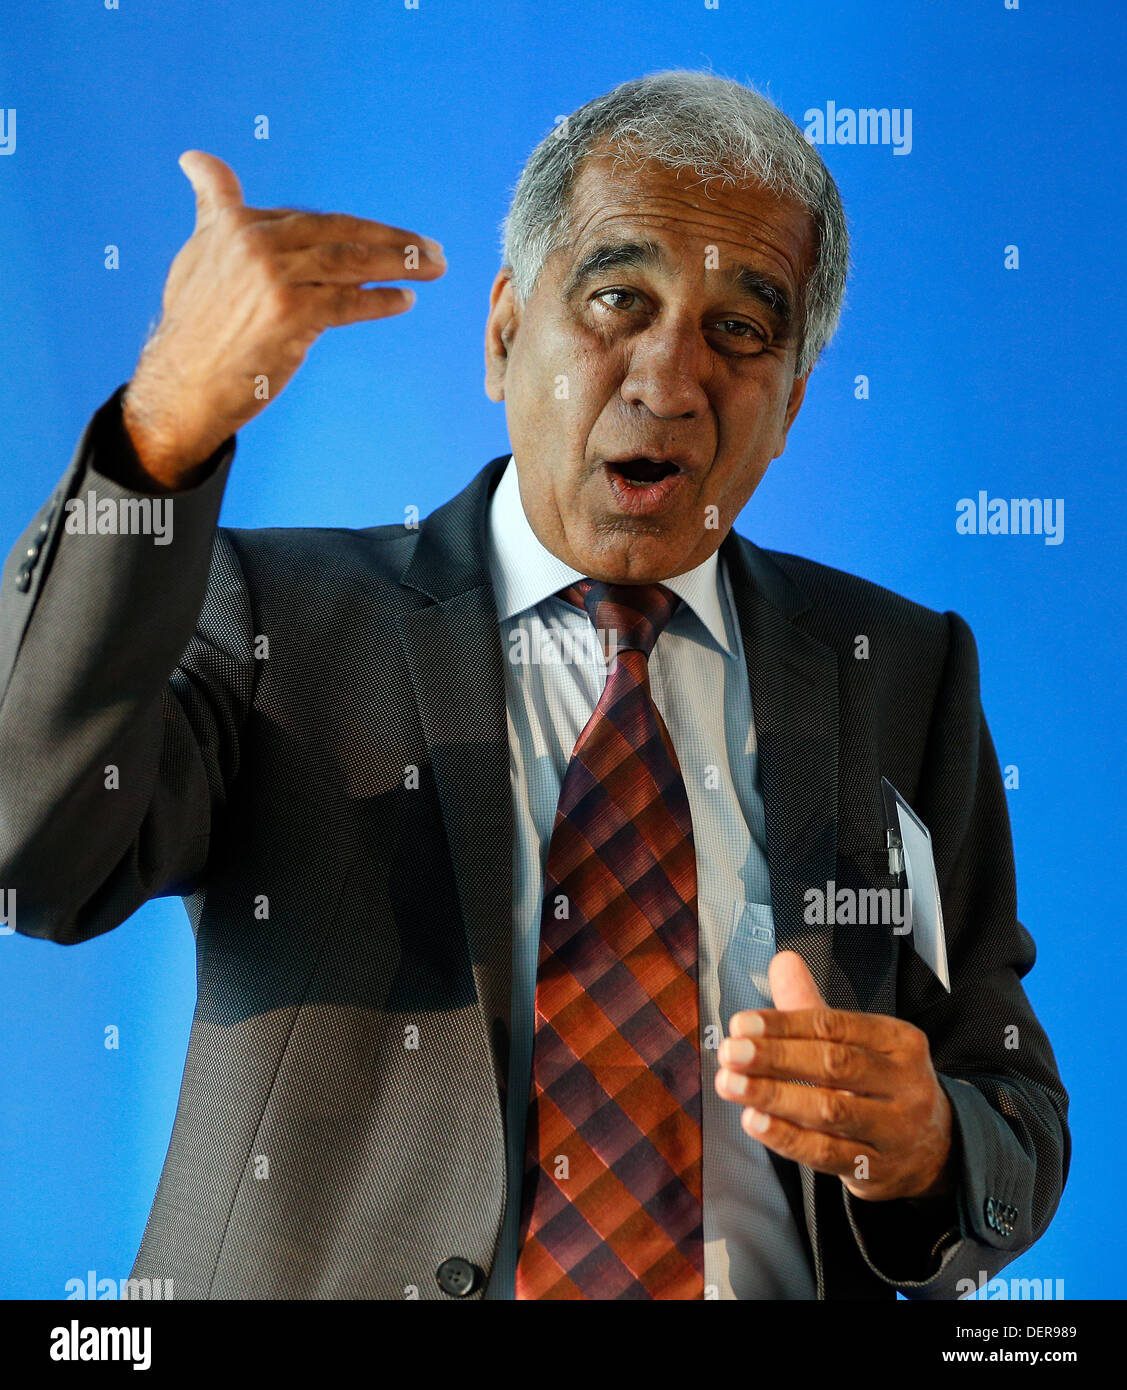 Climatologist Mojib Latif speaks at the press conference of the Extreme Weather Congress at Kuehne Logistic University in Hamburg, Germany, 23 September 2013. Experts and scientists will present the current state of research on the developments of extreme weather phenomena as climate change takes place. Photo: AXEL HEIMKEN Stock Photo